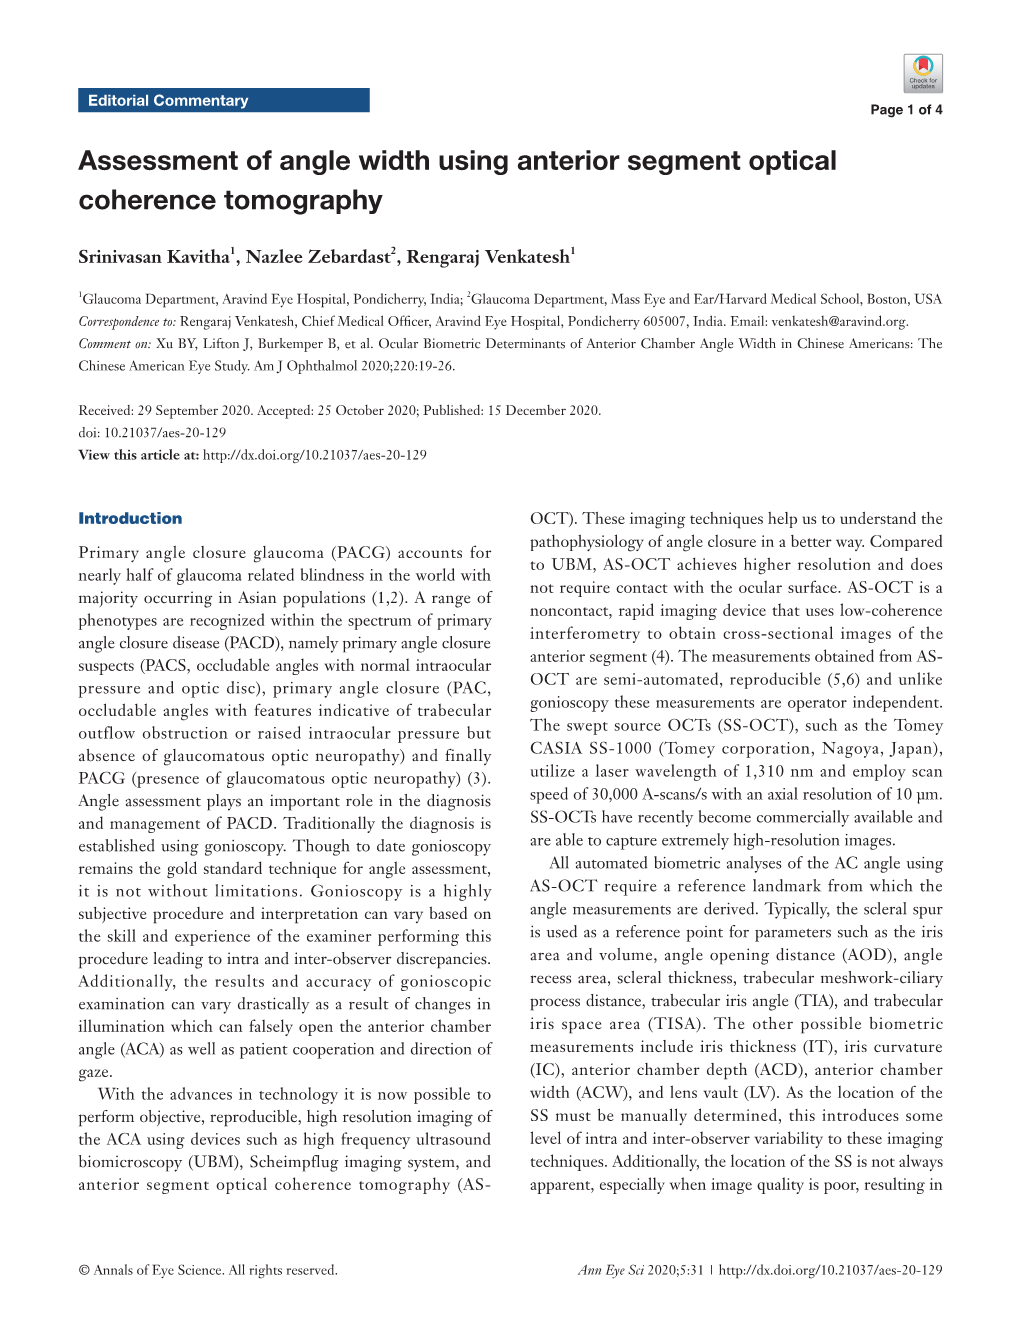 Assessment of Angle Width Using Anterior Segment Optical Coherence Tomography